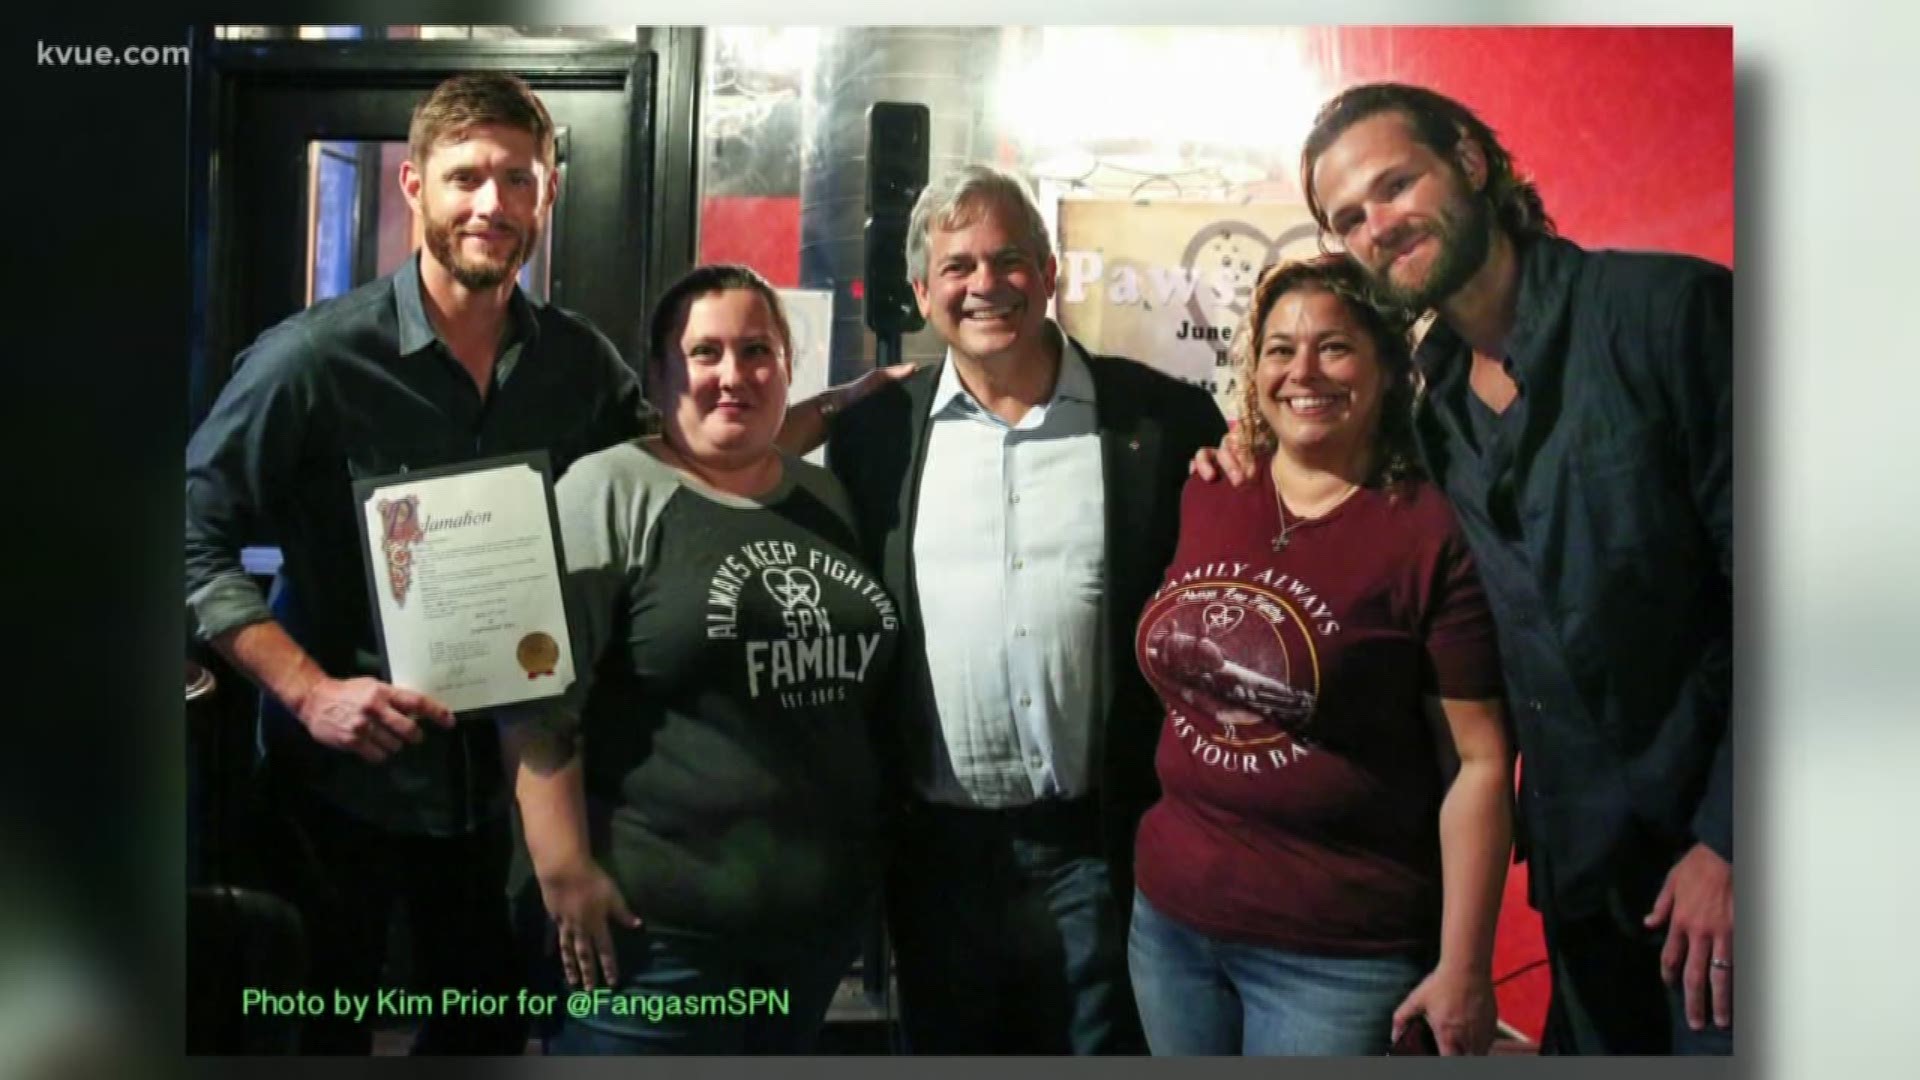 Local actors Jensen Ackles and Jared Padalecki have been granted an official holiday by the City of Austin.